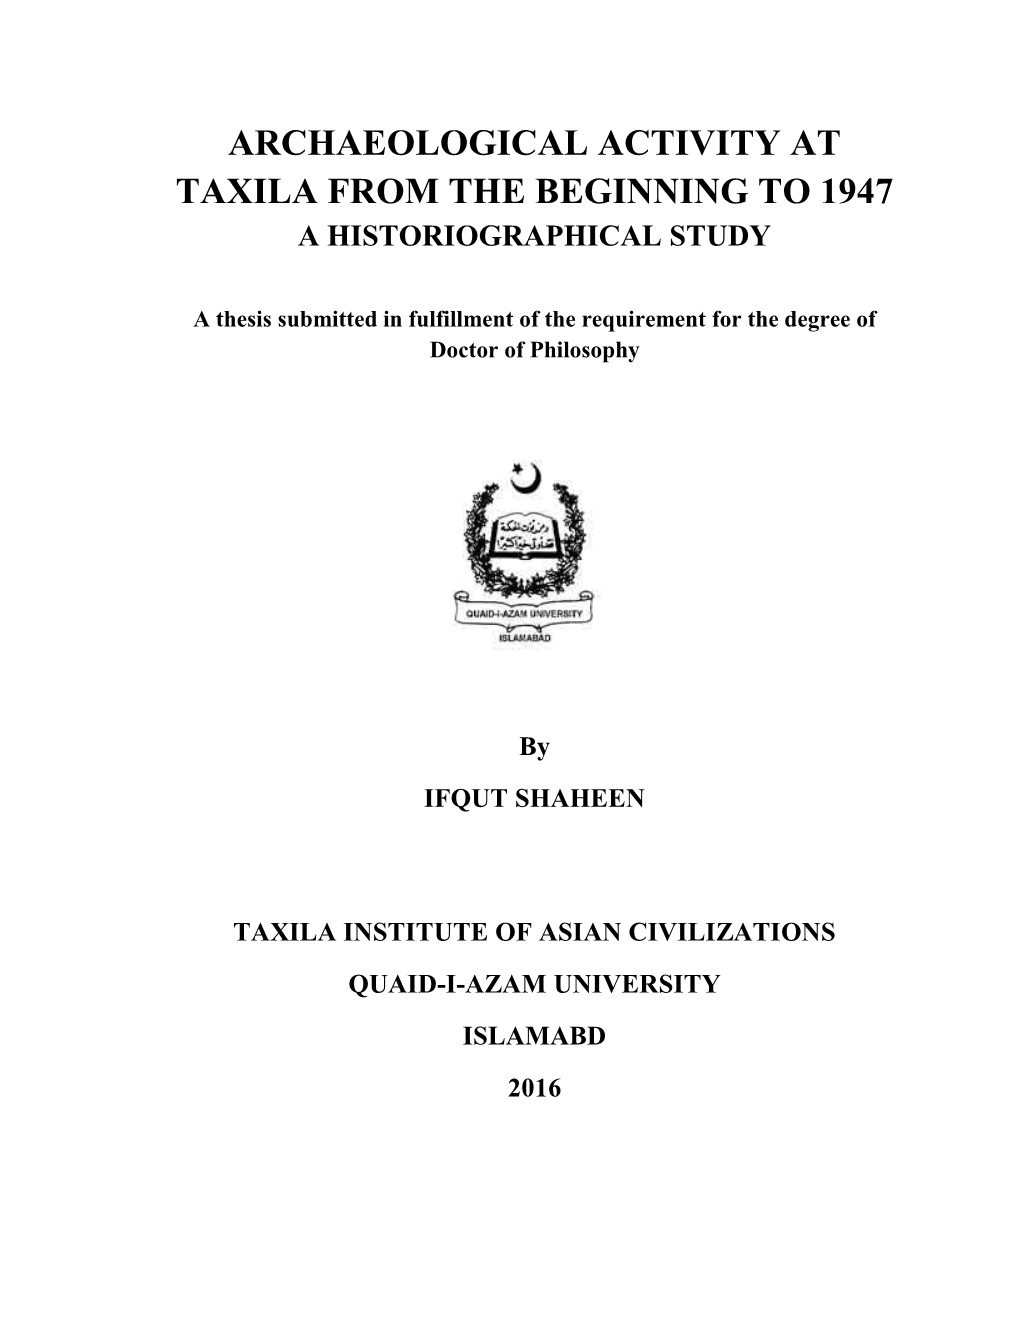 Archaeological Activity at Taxila from the Beginning to 1947 a Historiographical Study